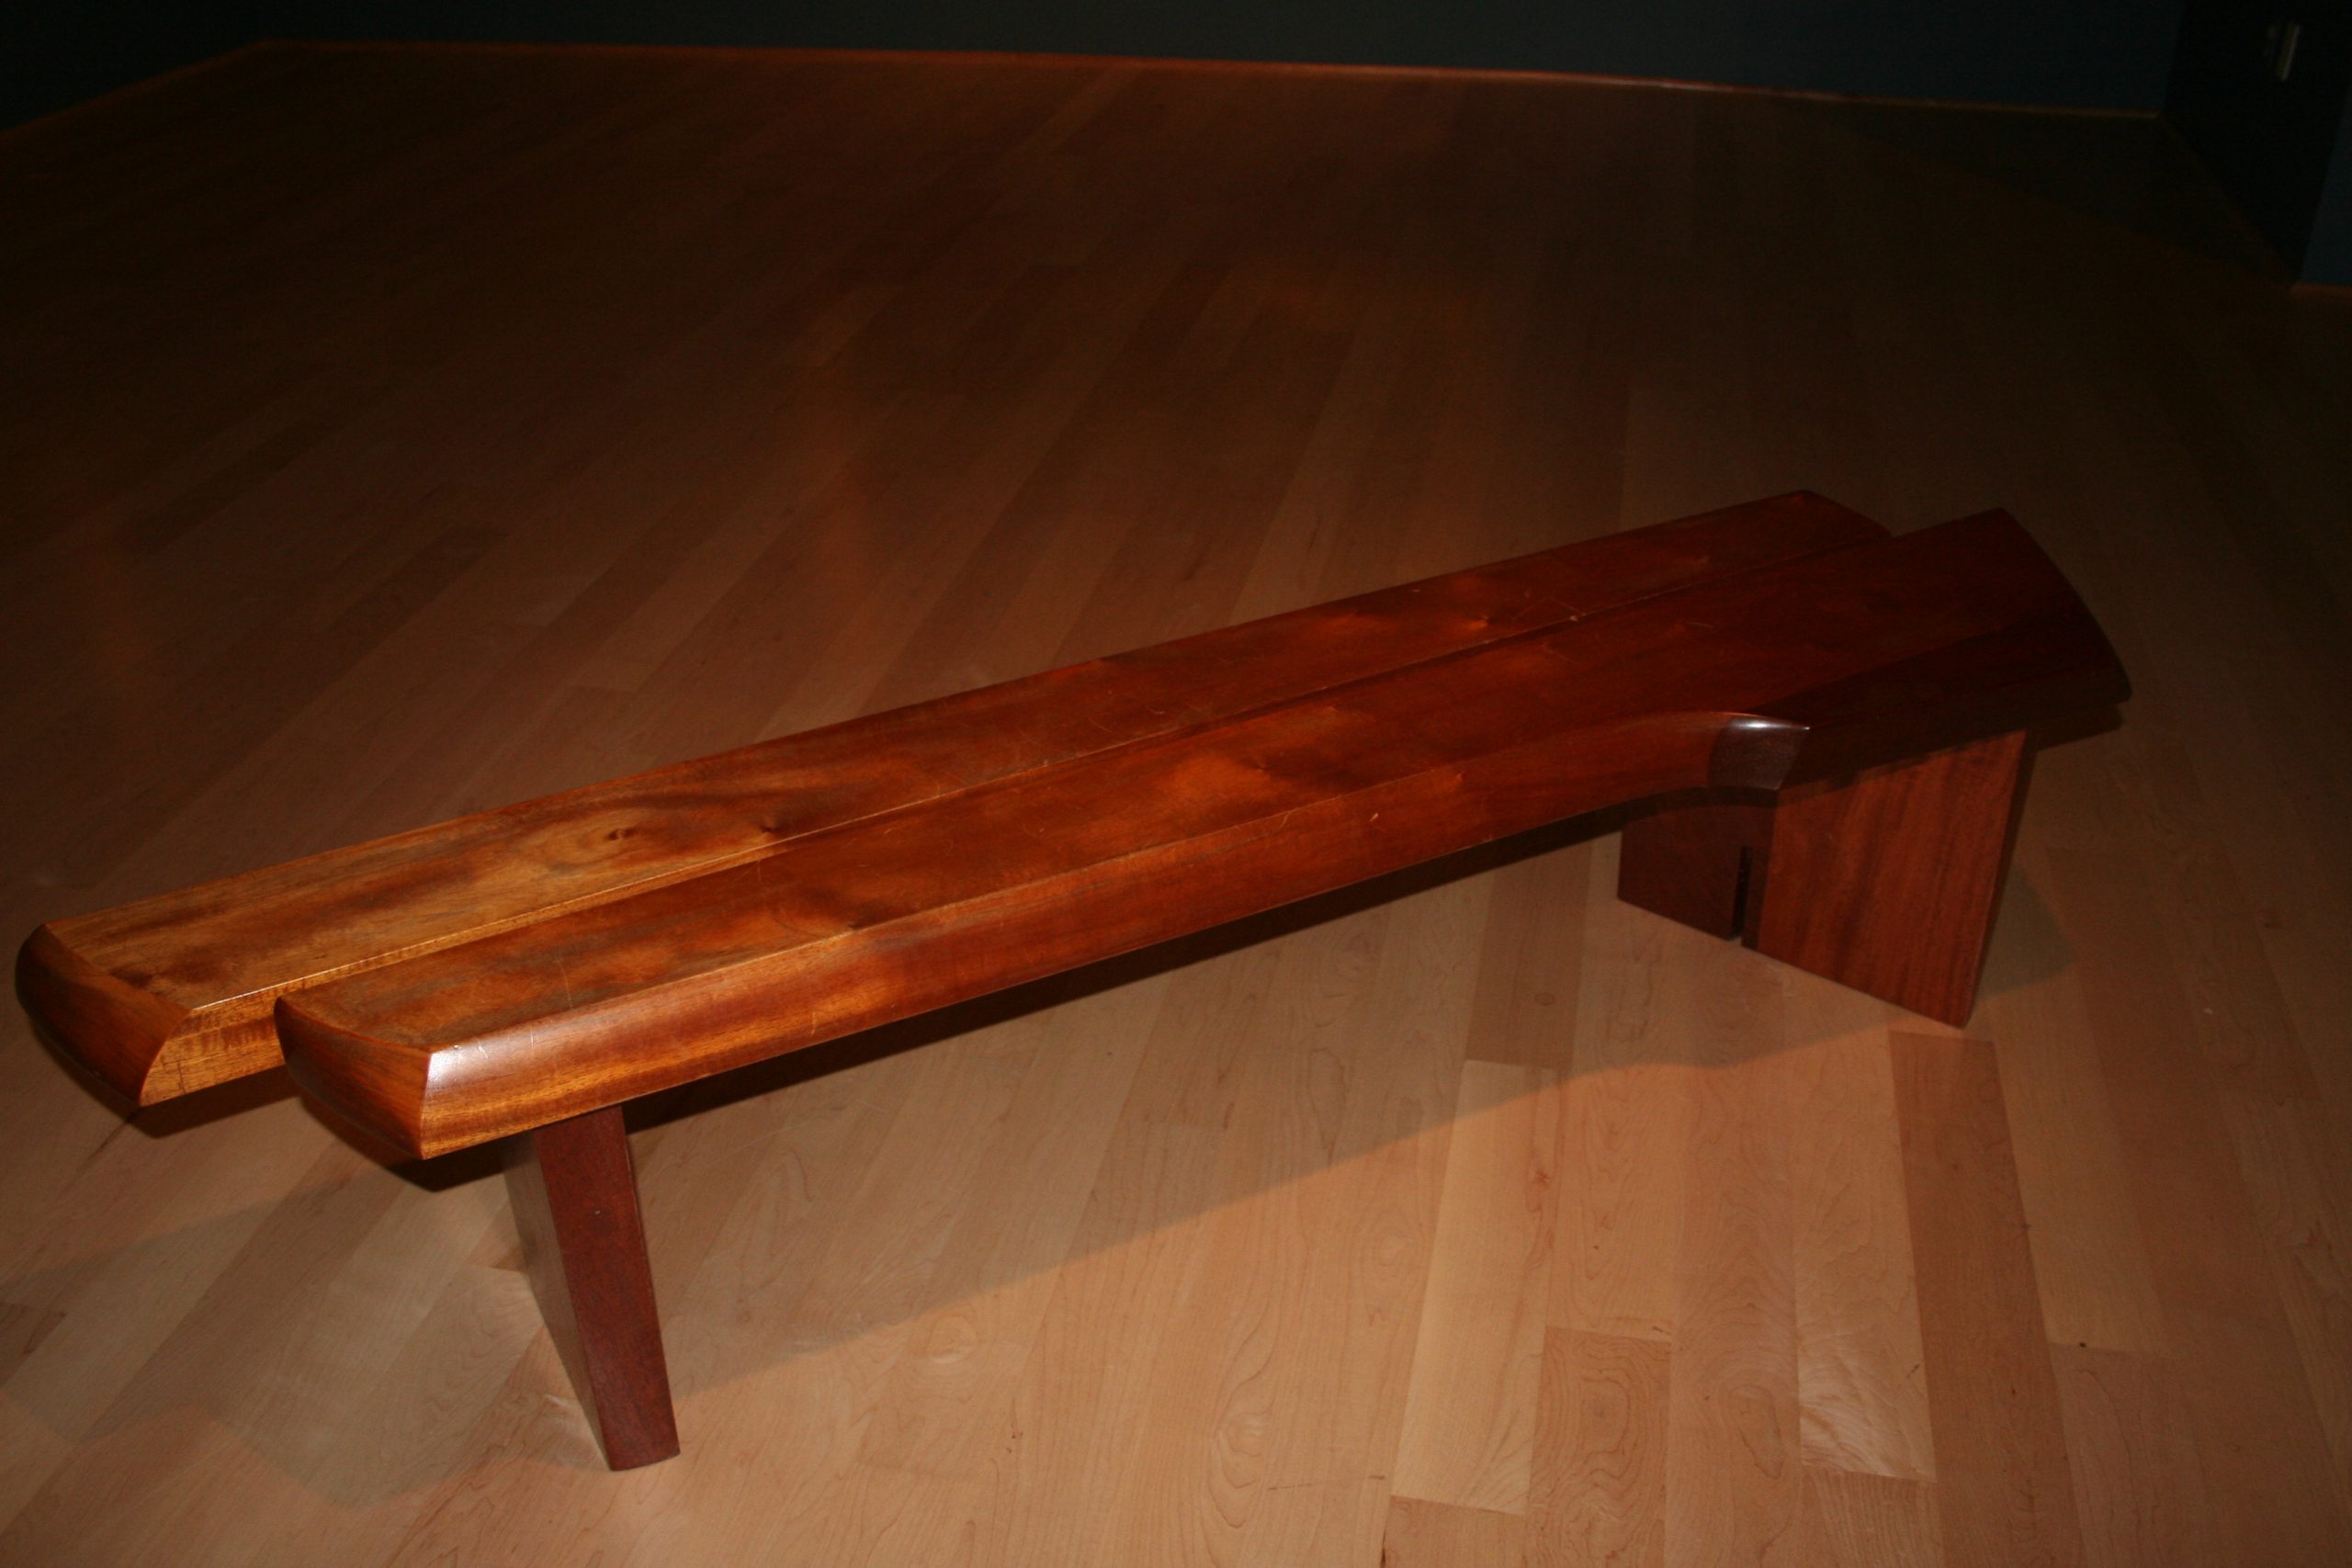 Museum benches